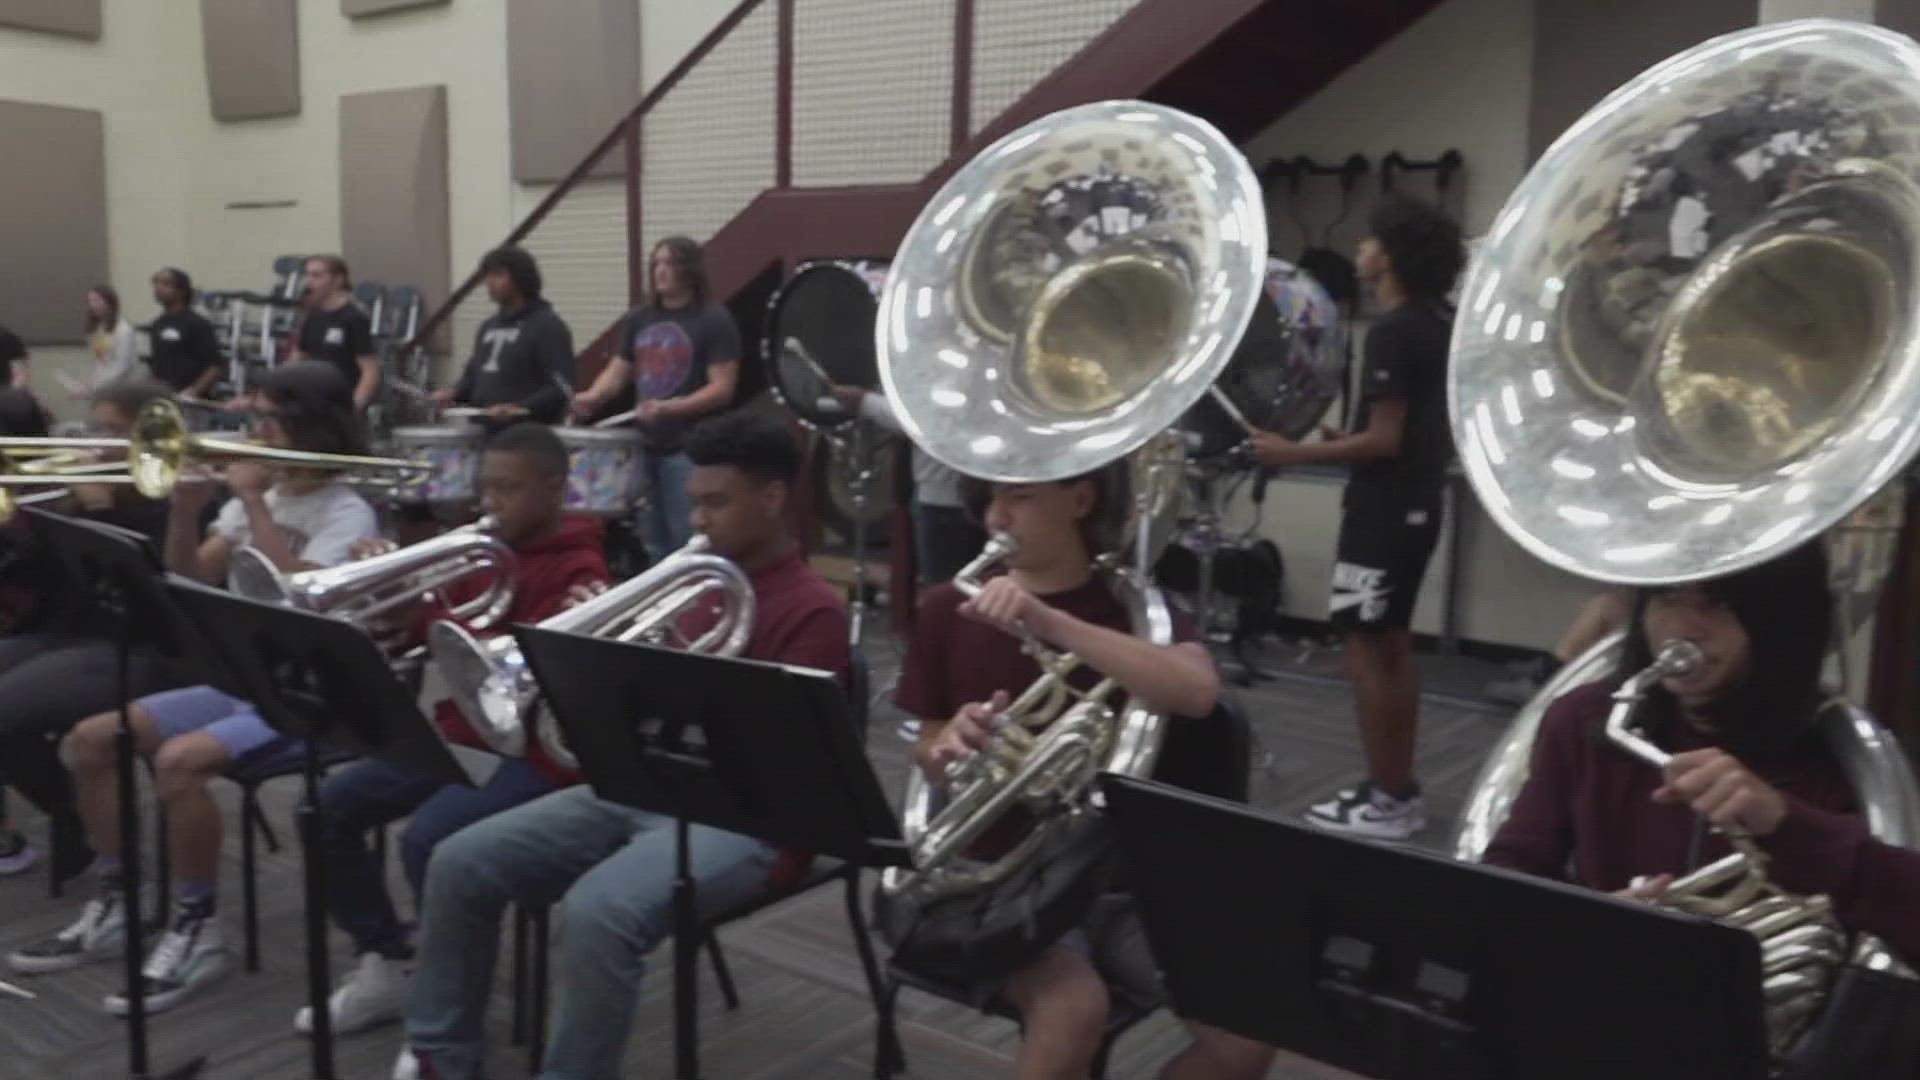 Katie Inman catches up with Fulton High School's marching band. August 17, 2022-4pm.